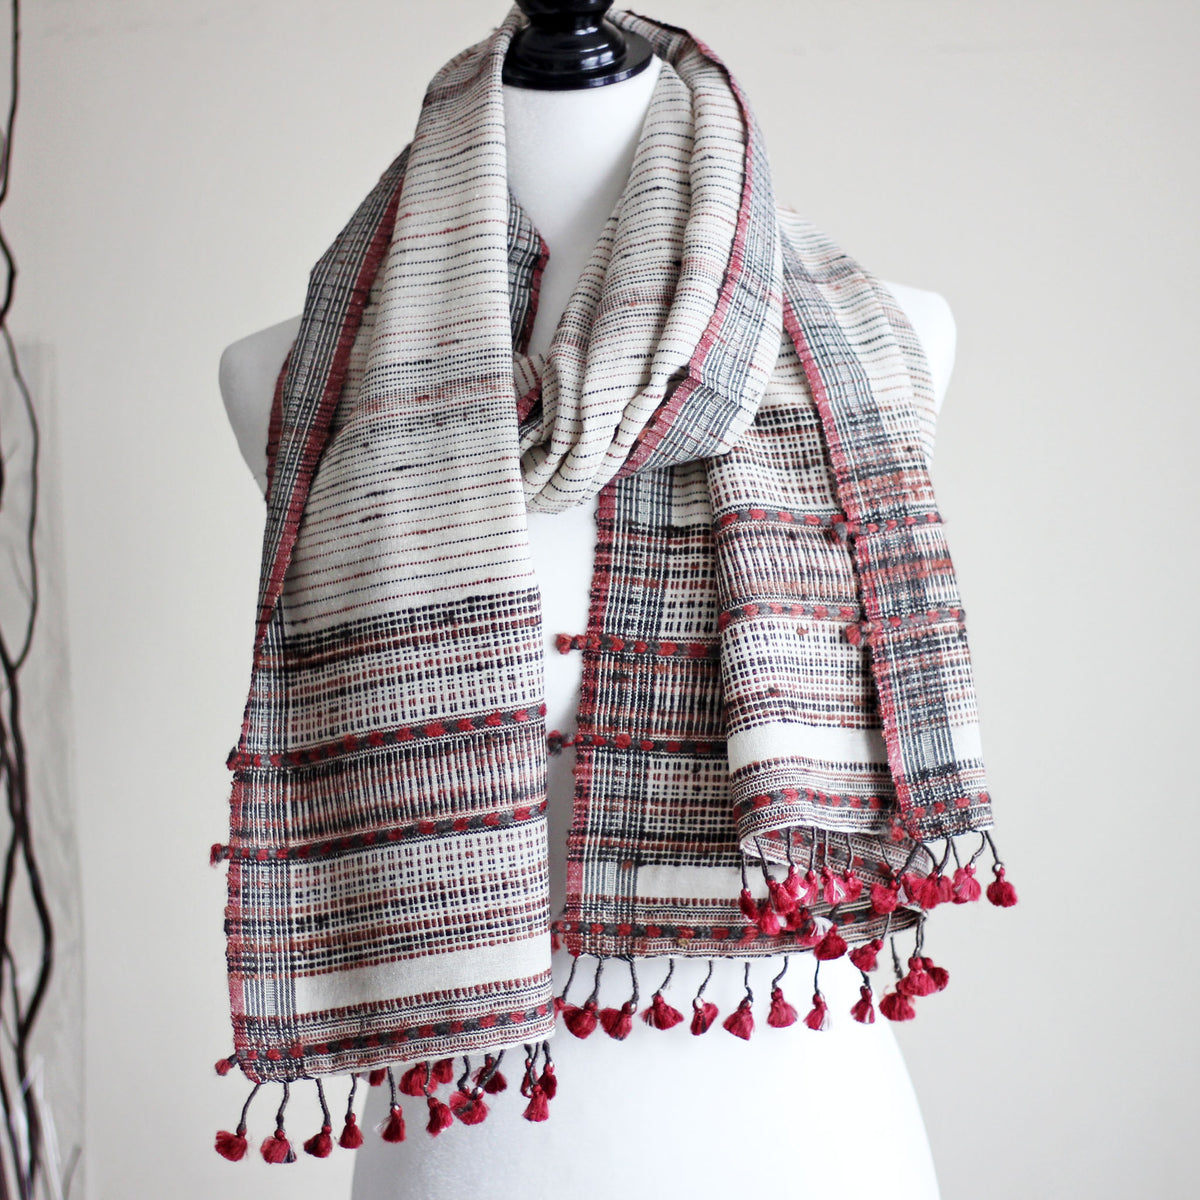 Naturally Dyed Handwoven Wrap - Blend of Cotton & Silk 